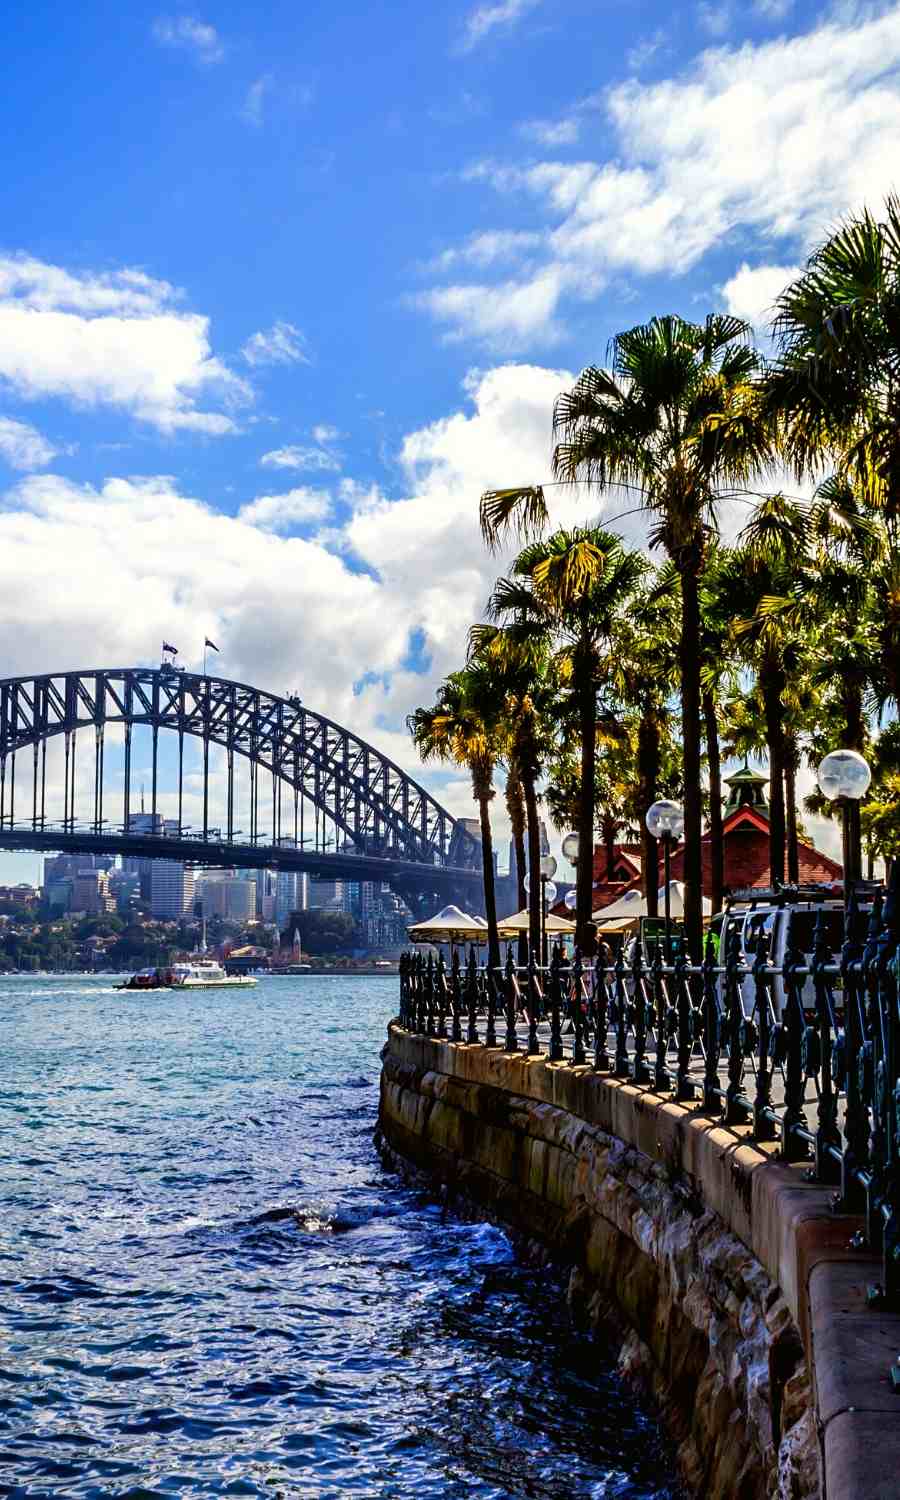 Where To Stay In Sydney For Tourists, with family, kids